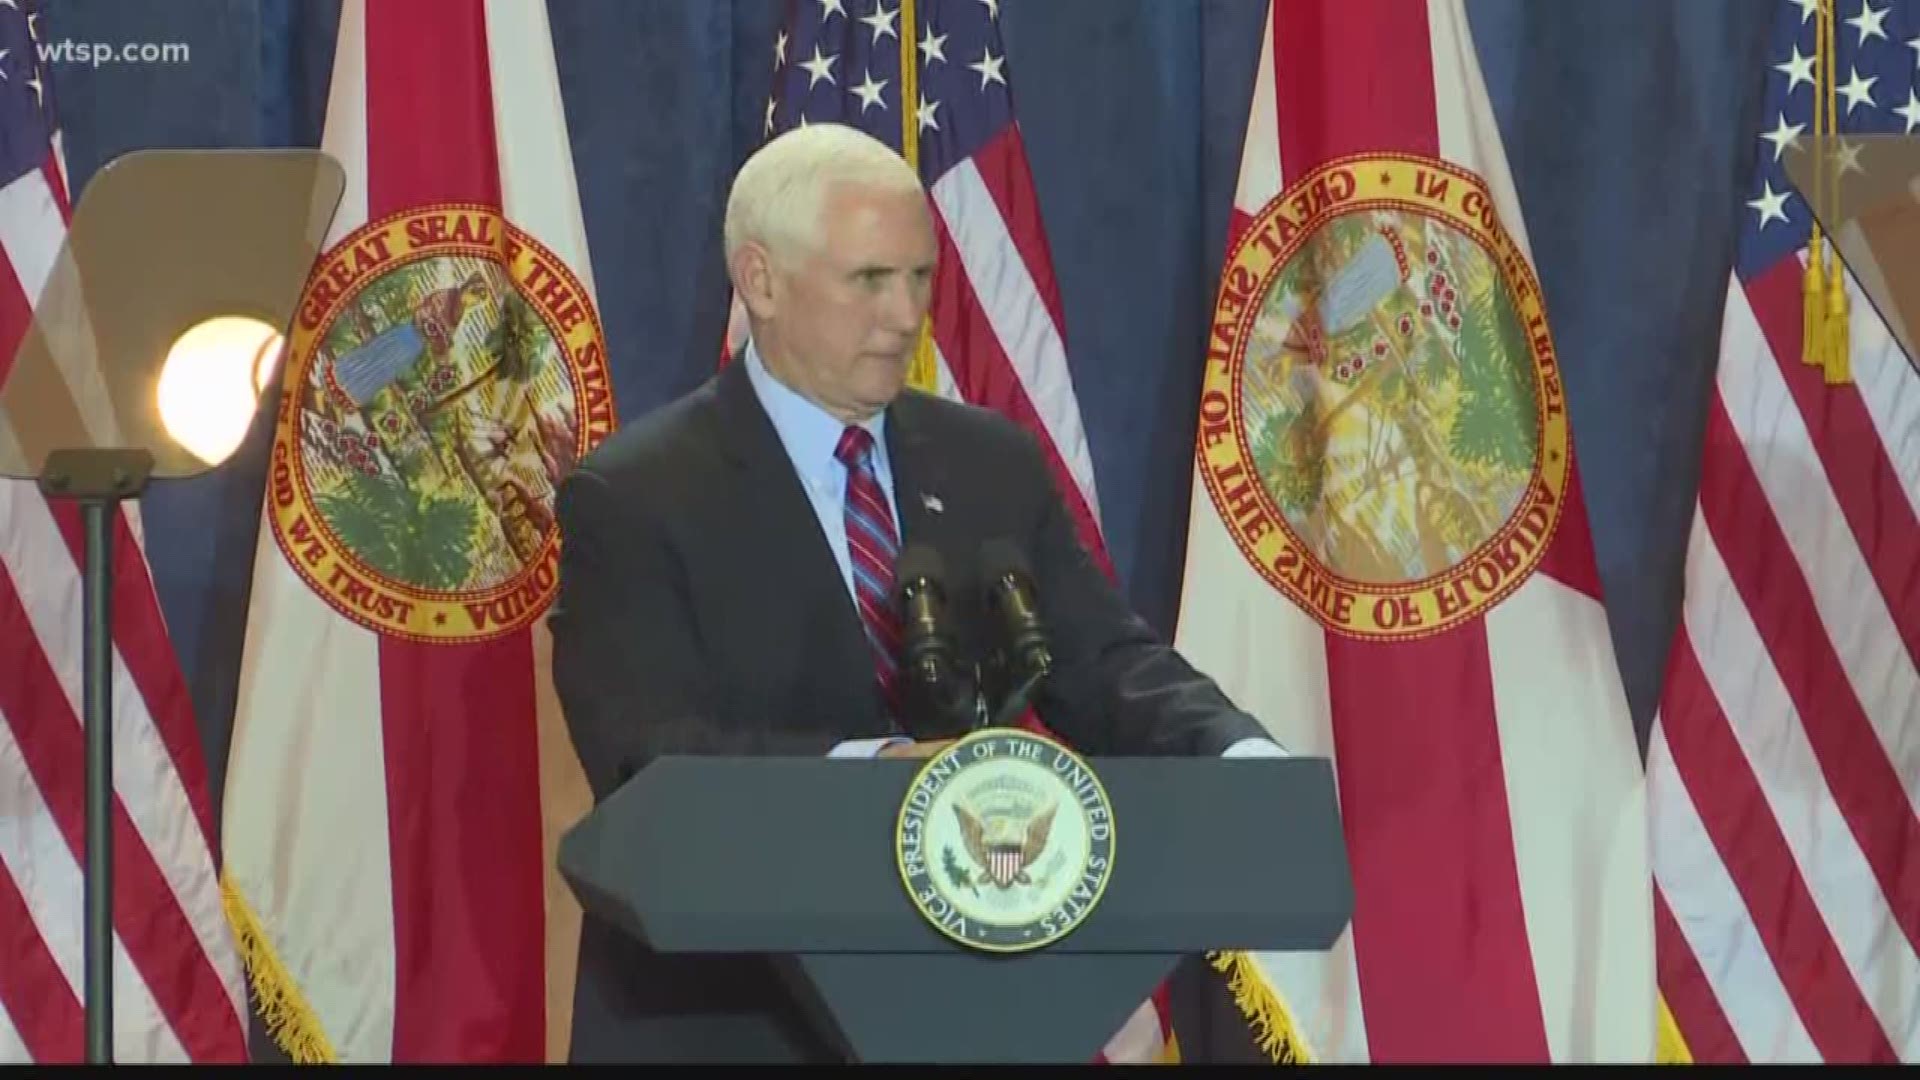 He spoke at a Keep America Great event at The Venetian Events Center in Tampa. Pence then took part in a bus tour from Tampa to Kissimmee.